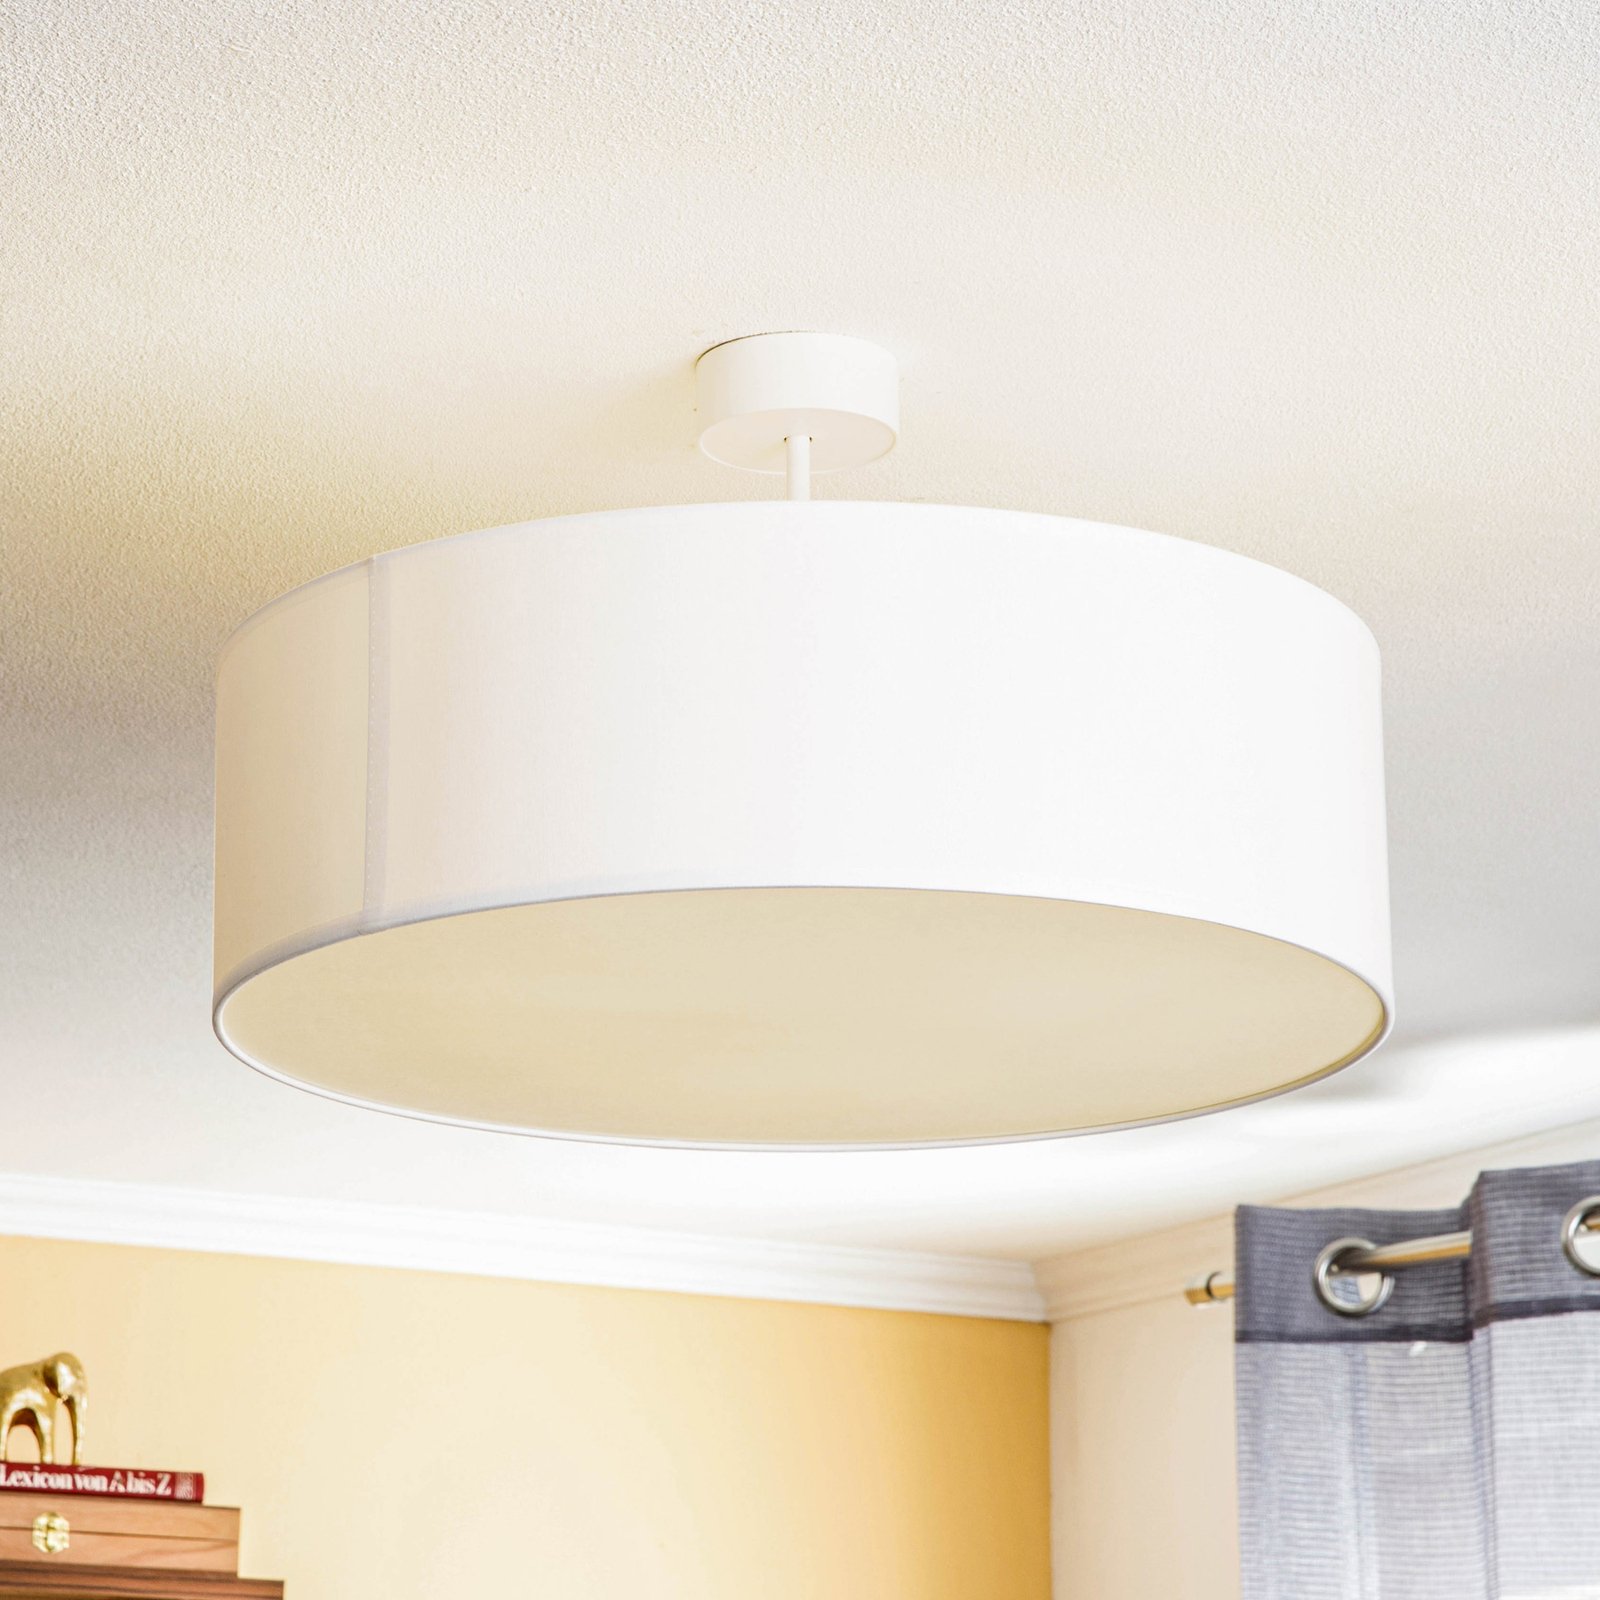 Violet ceiling light with spacer, white